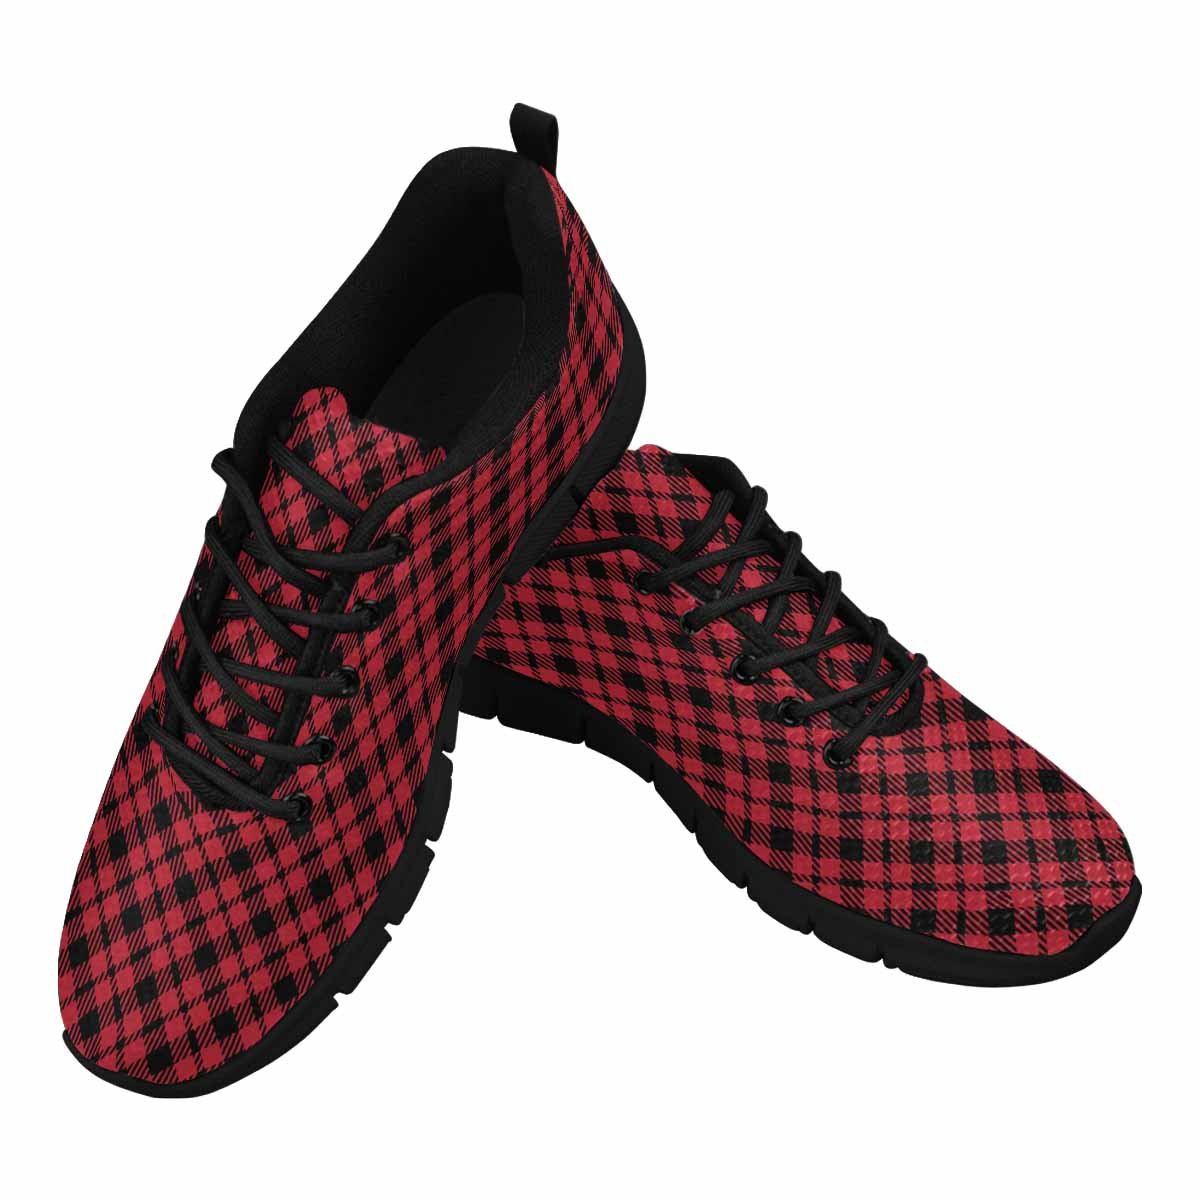 Uniquely You Sneakers for Men, Buffalo Plaid Red and Black Running - KRE Prime Deals